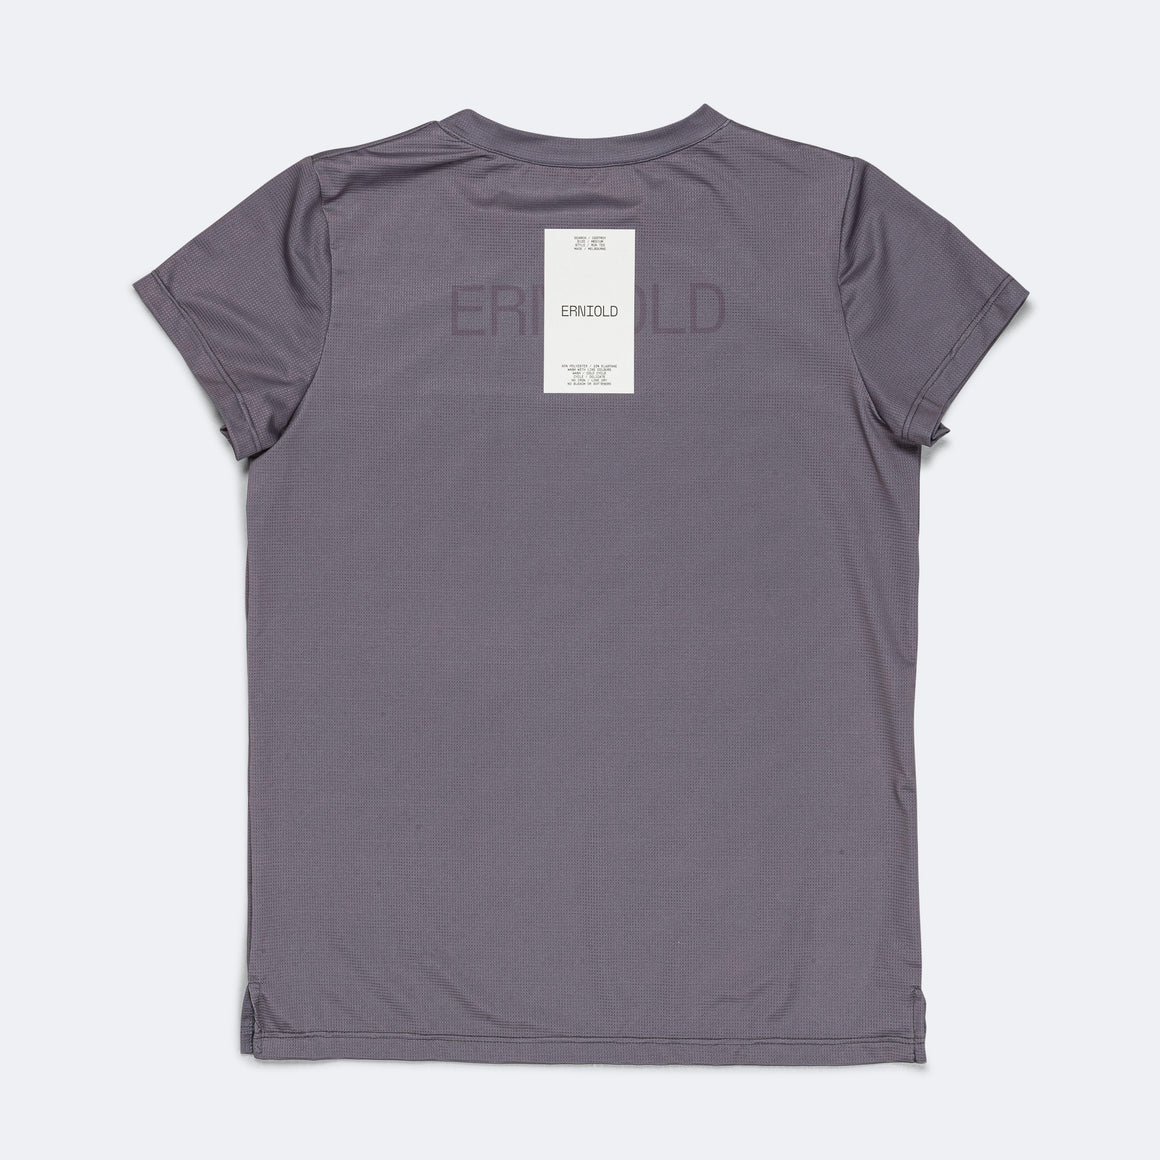 Erniold - Womens Run Tee - Dusk - Up There Athletics